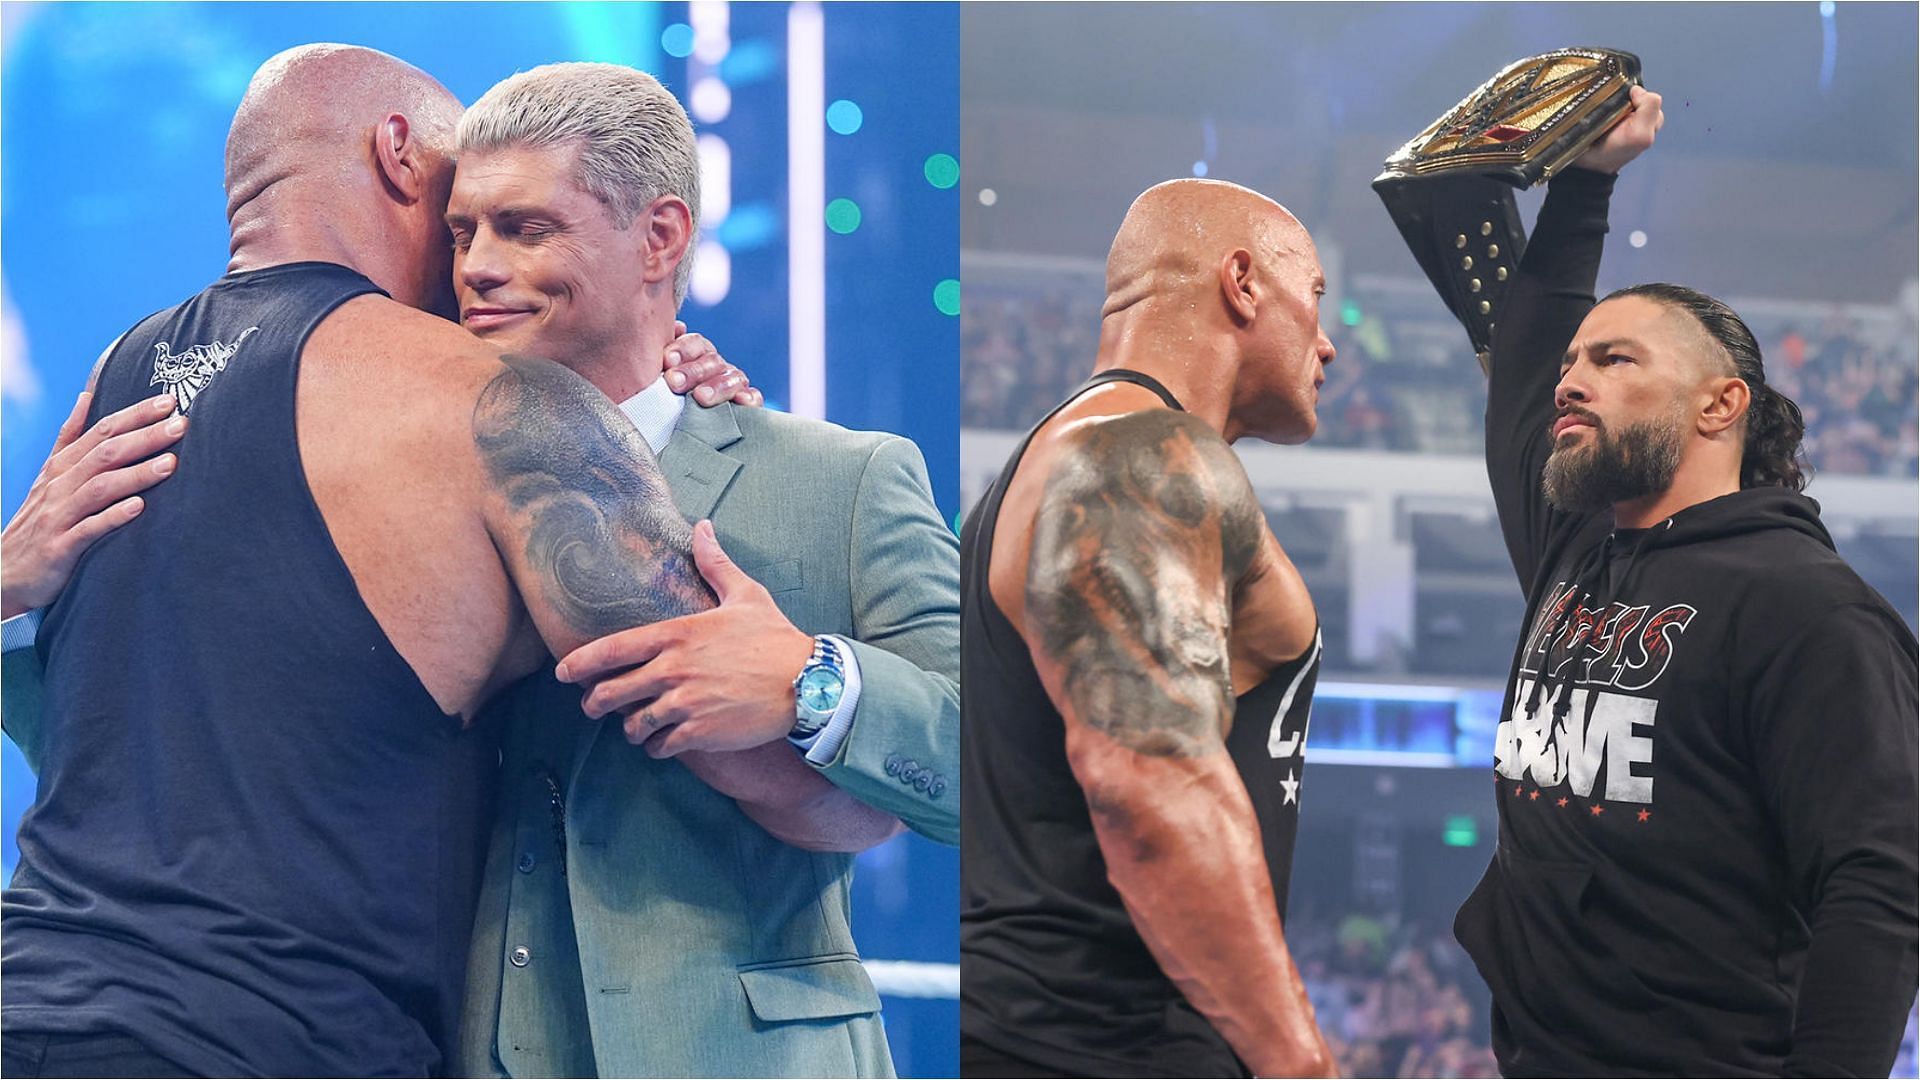 The Rock, Roman Reigns, and Cody Rhodes will be in the spotlight on Thursday